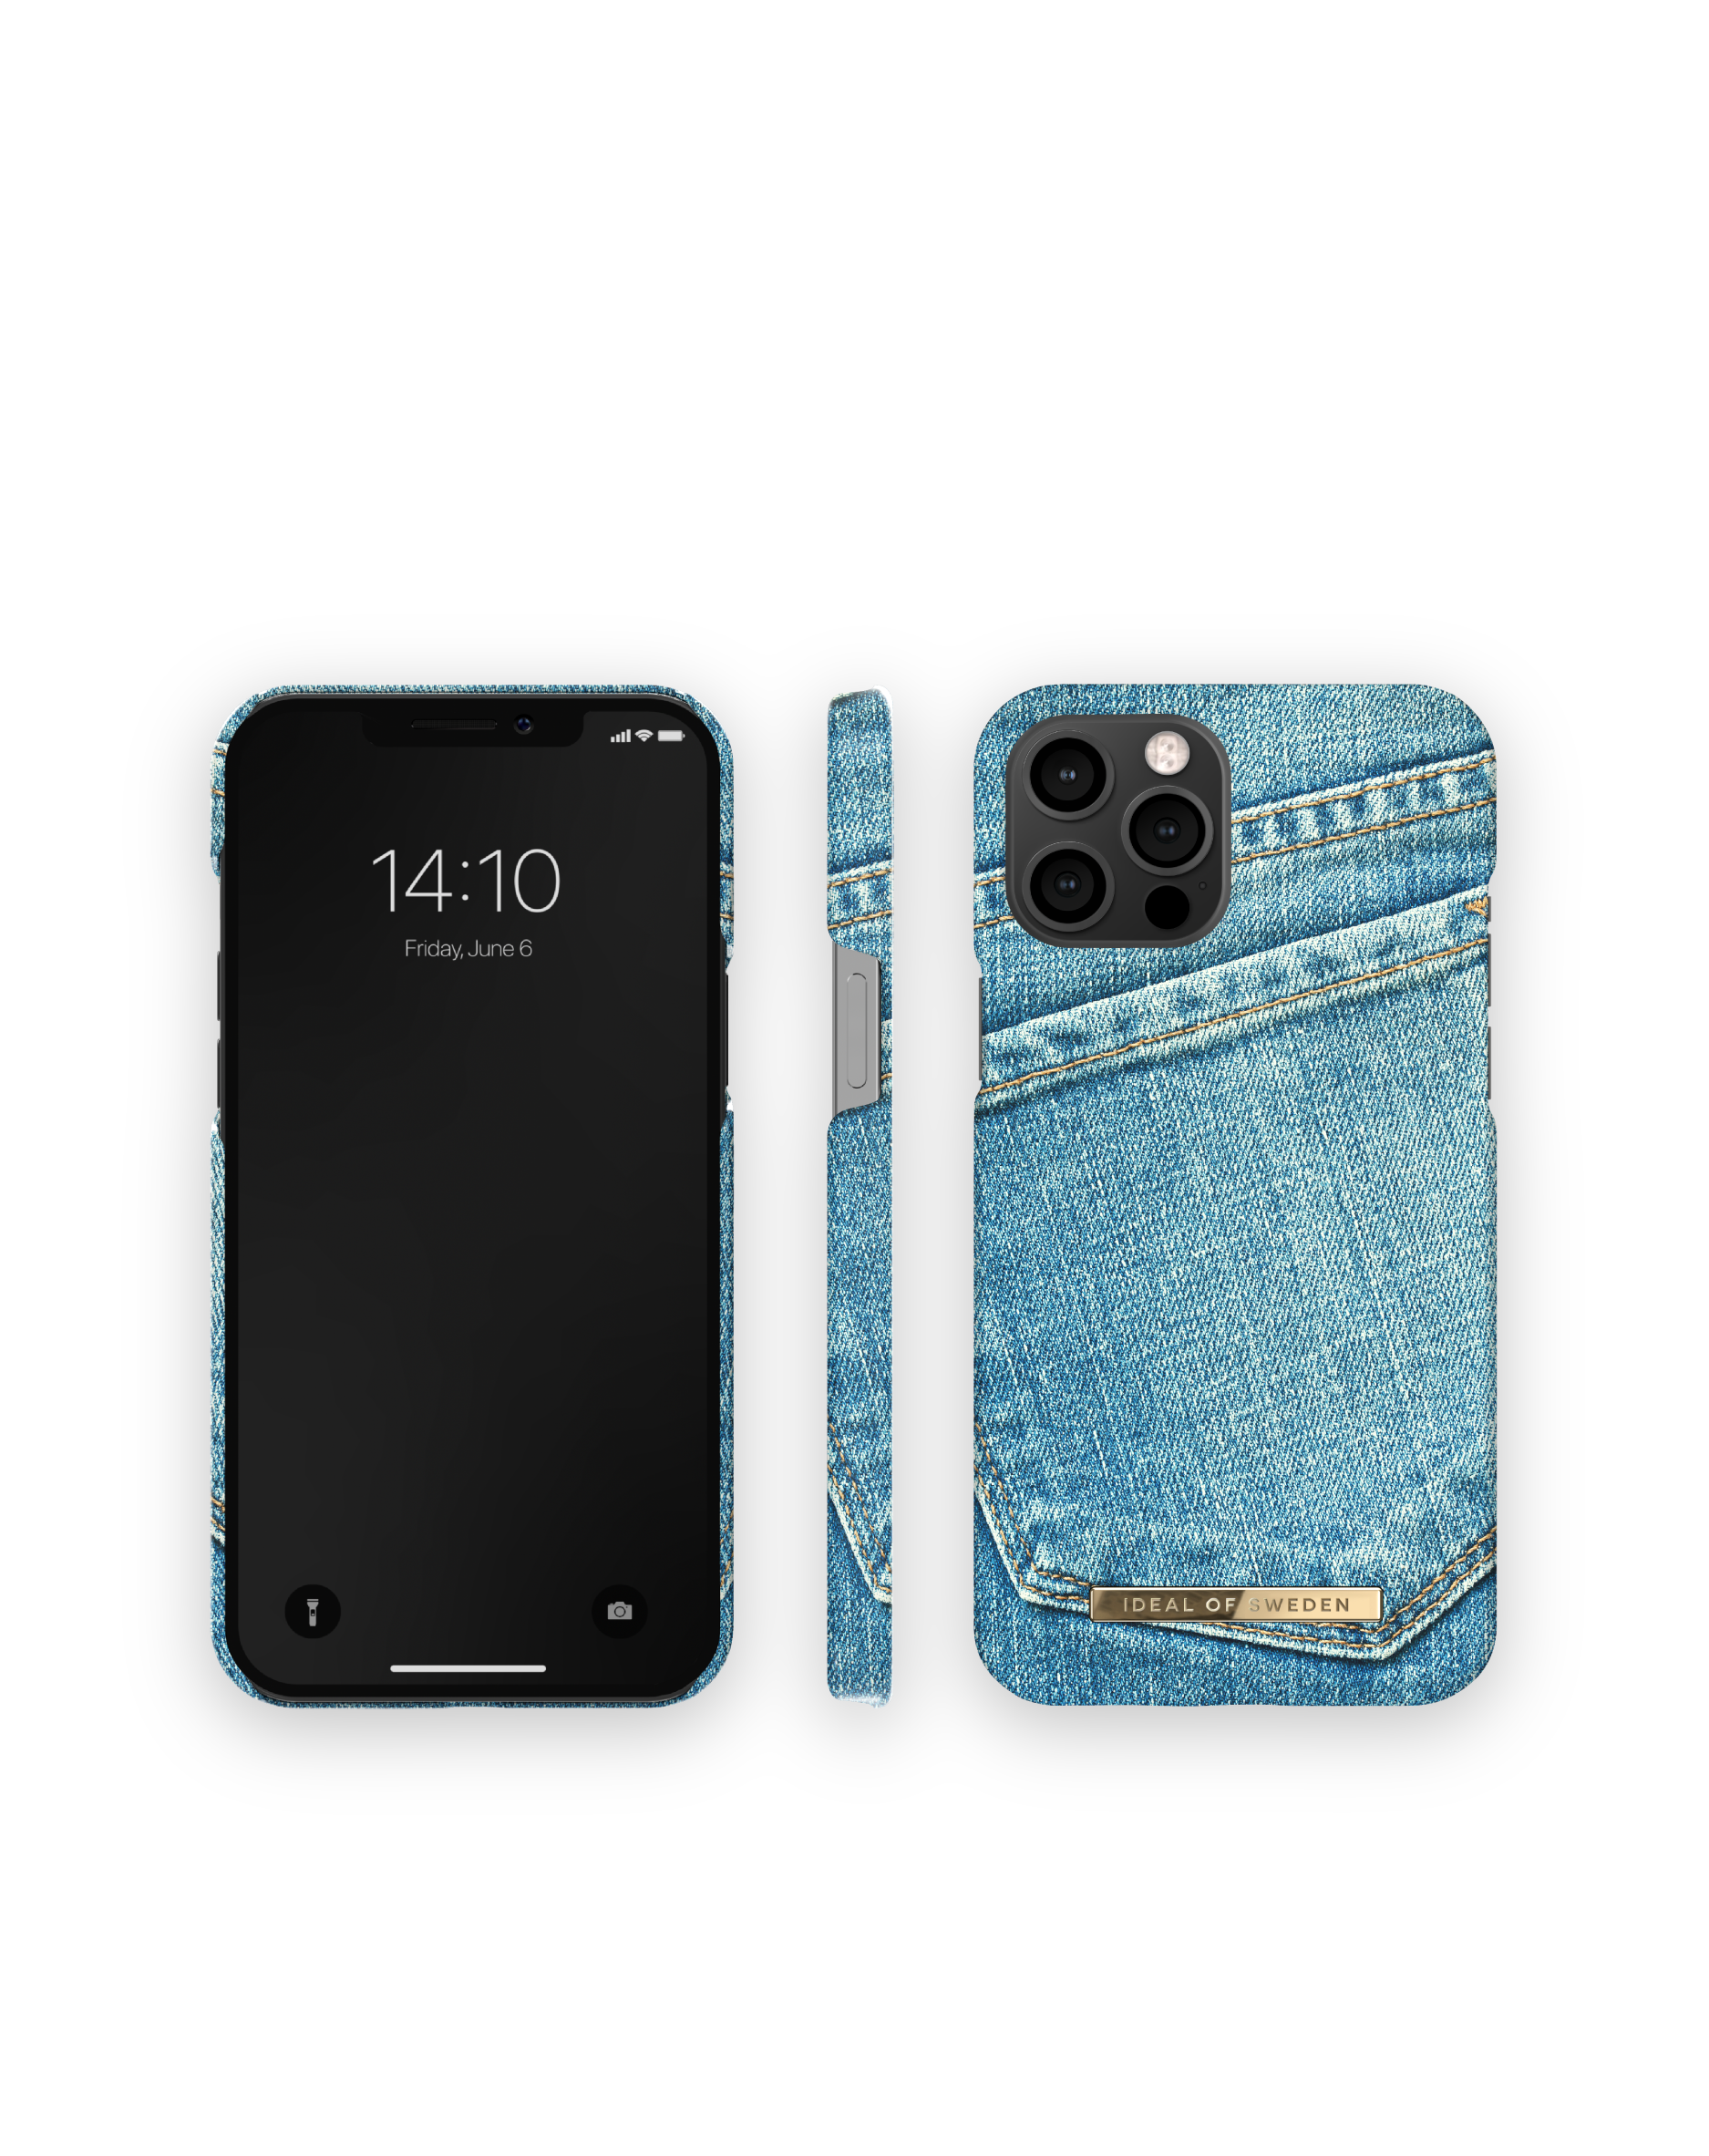 iPhone Bliss Apple, Denim Pro IDEAL Backcover, IDFCSS22-I2067-413, Max, (Ltd) 12 SWEDEN OF